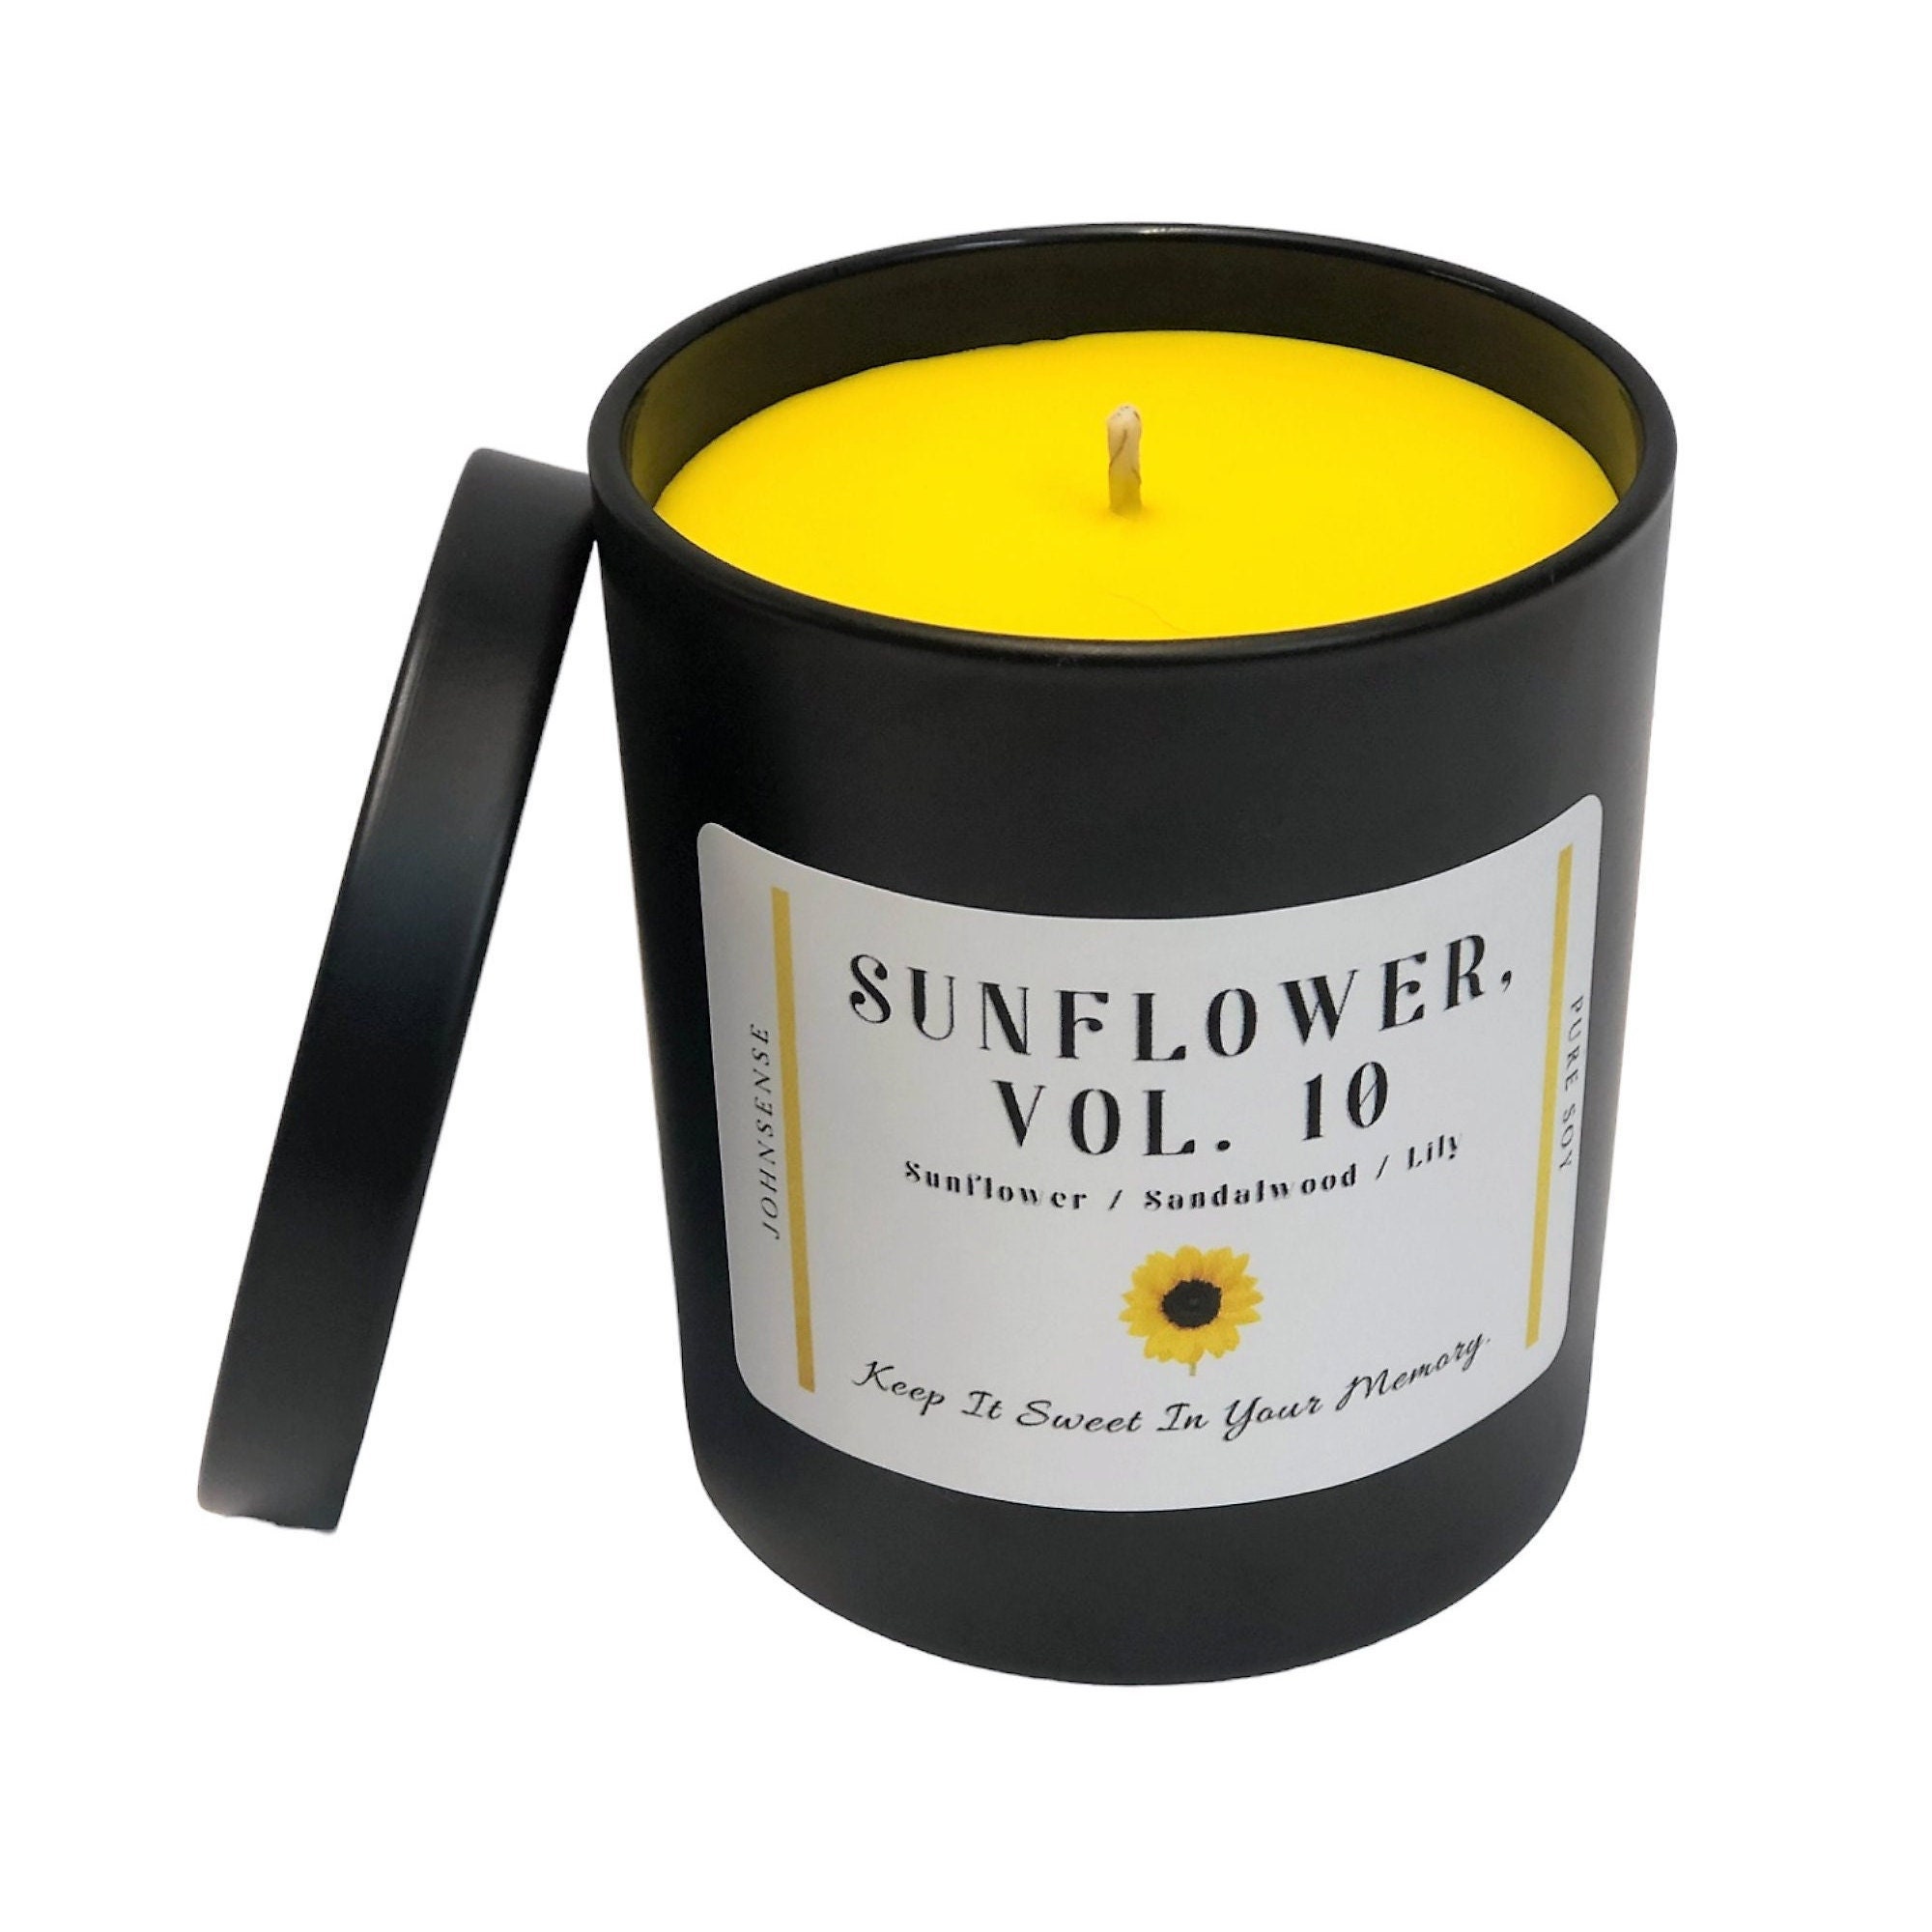 Sunflower Beeswax Candle Pure Beeswax All Natural Aesthetic 